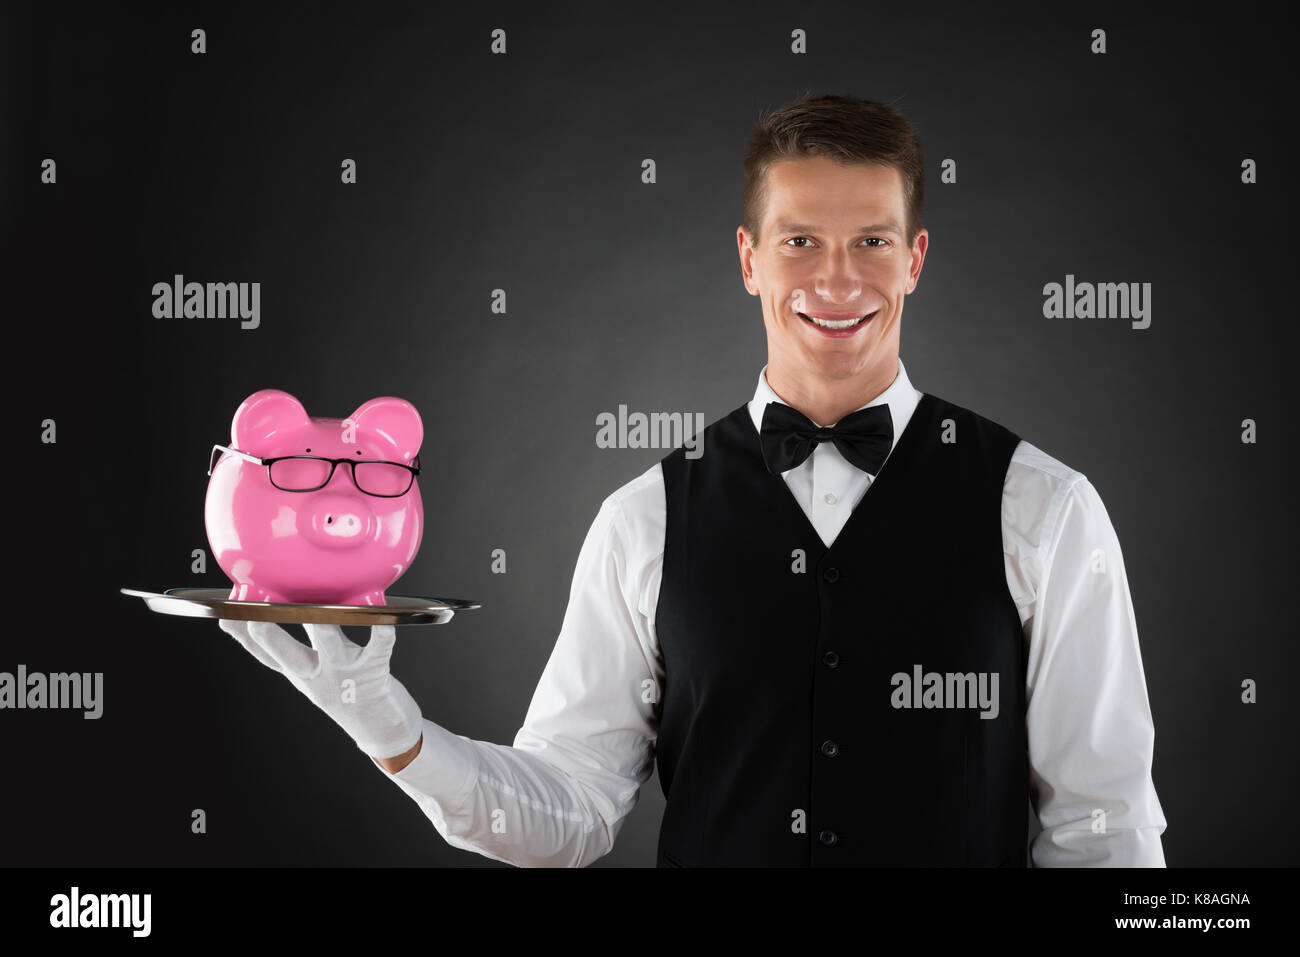 Portrait Of Happy Butler Holding Tray With Pink Piggybank Stock Photo